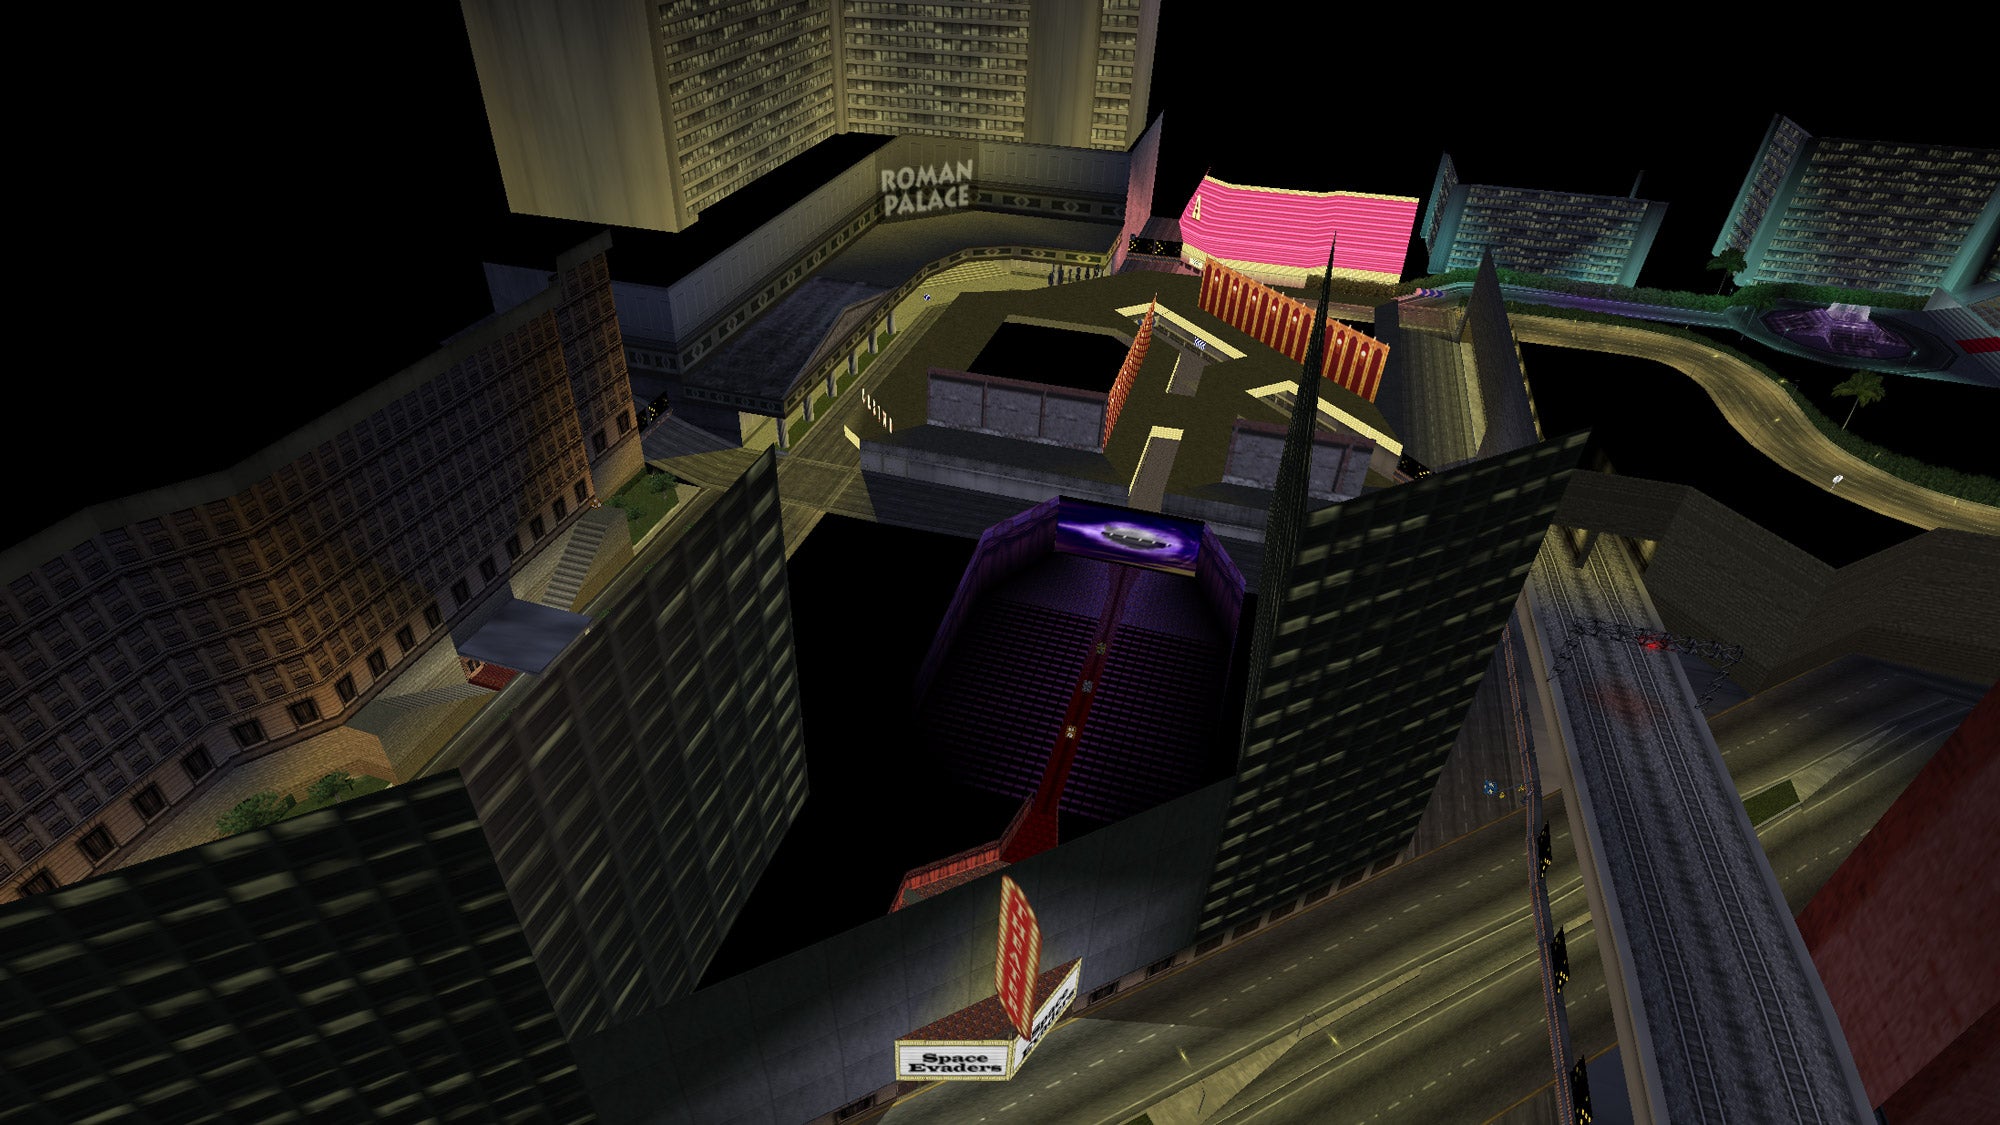 Explore The Secrets Of One Of The N64’s Best Racing Games With This Nifty Level Viewer